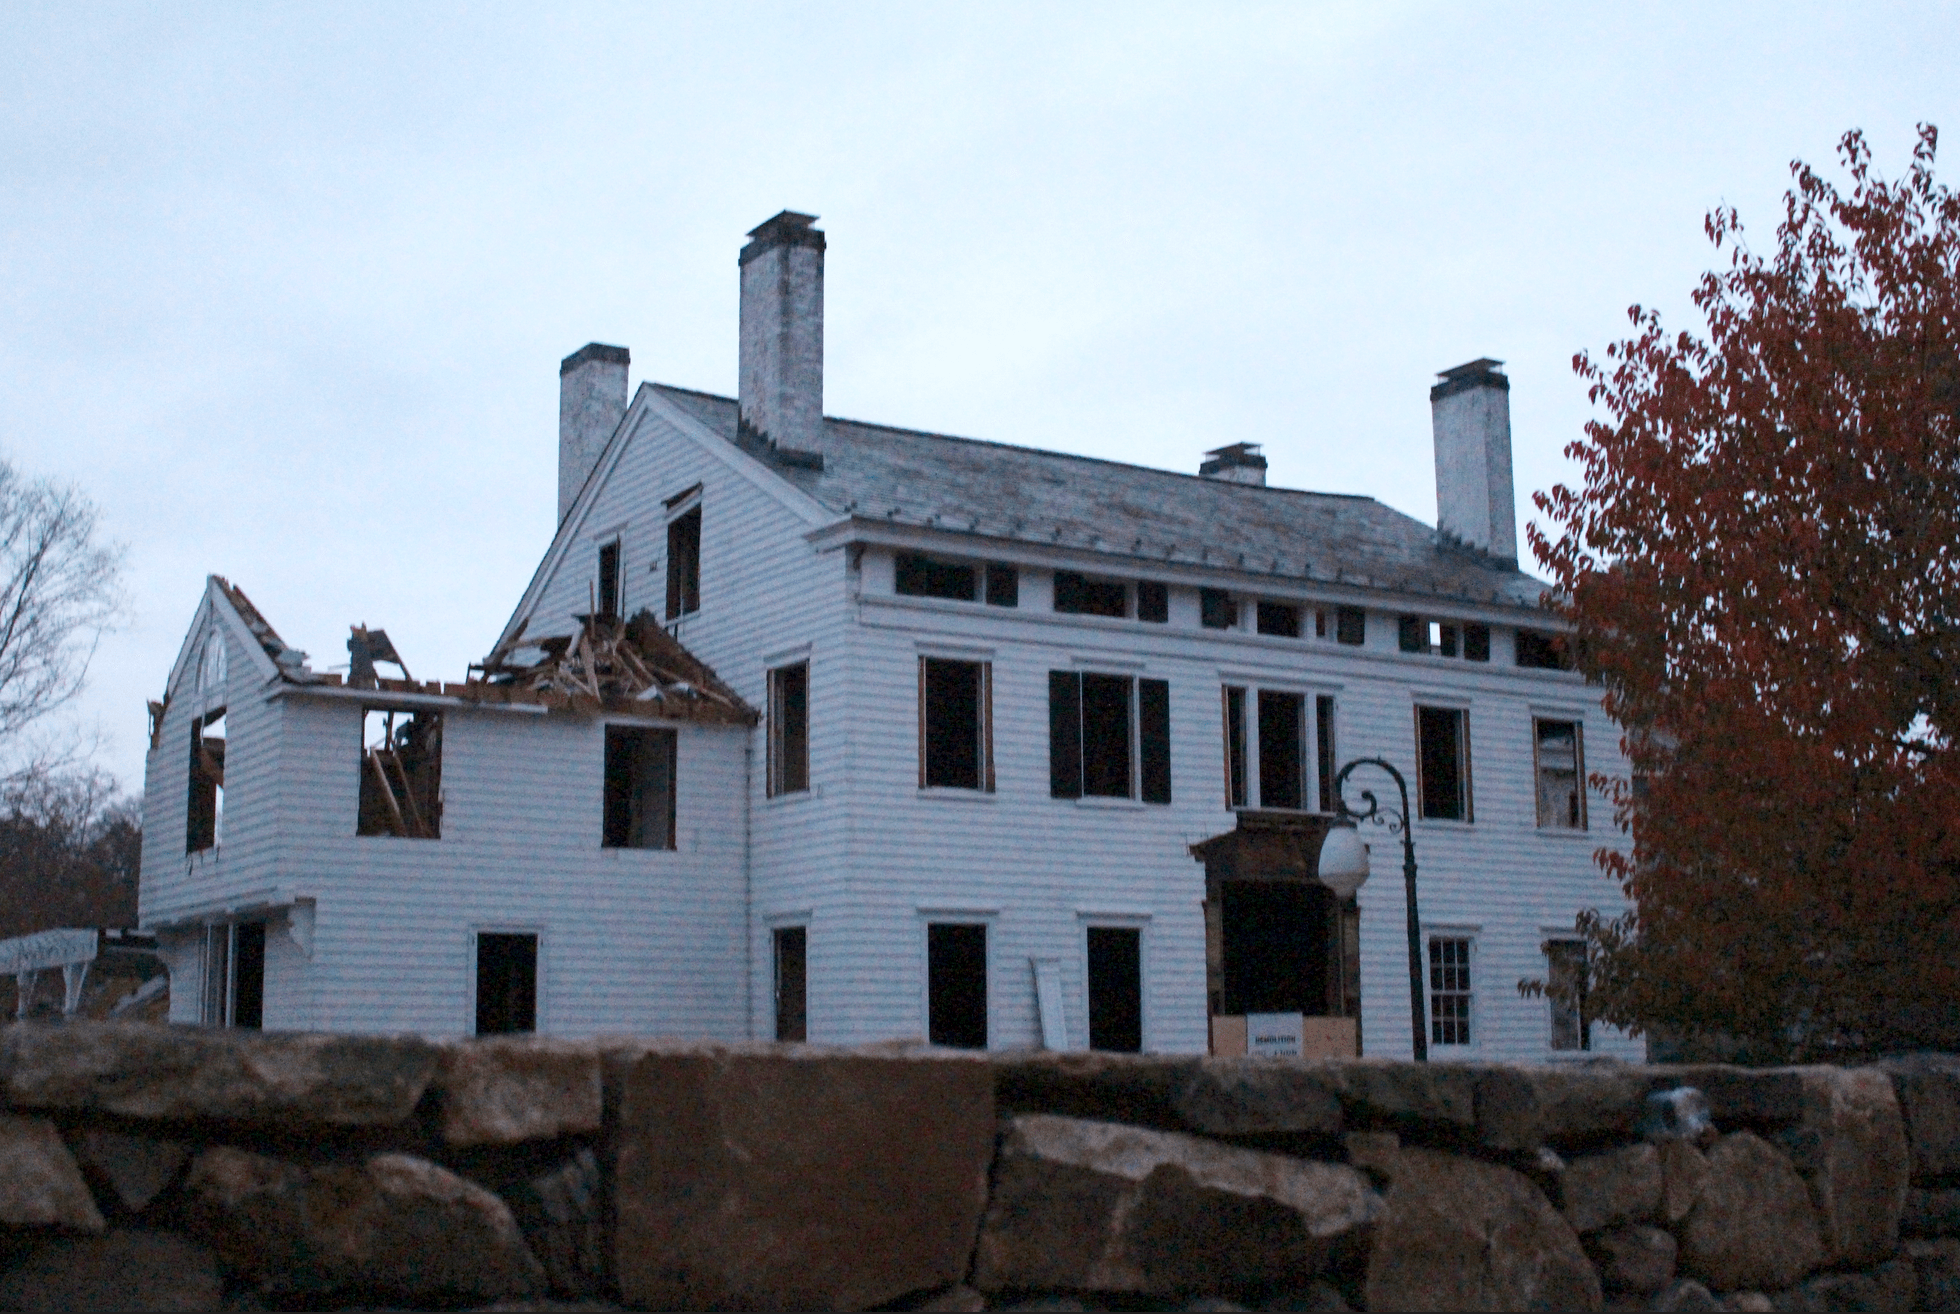  Around dusk on Wednesday Nov 9, Hobby Horse Farm succumbed to the wrecking ball. Nov 9,2016 Credit: Leslie Yager